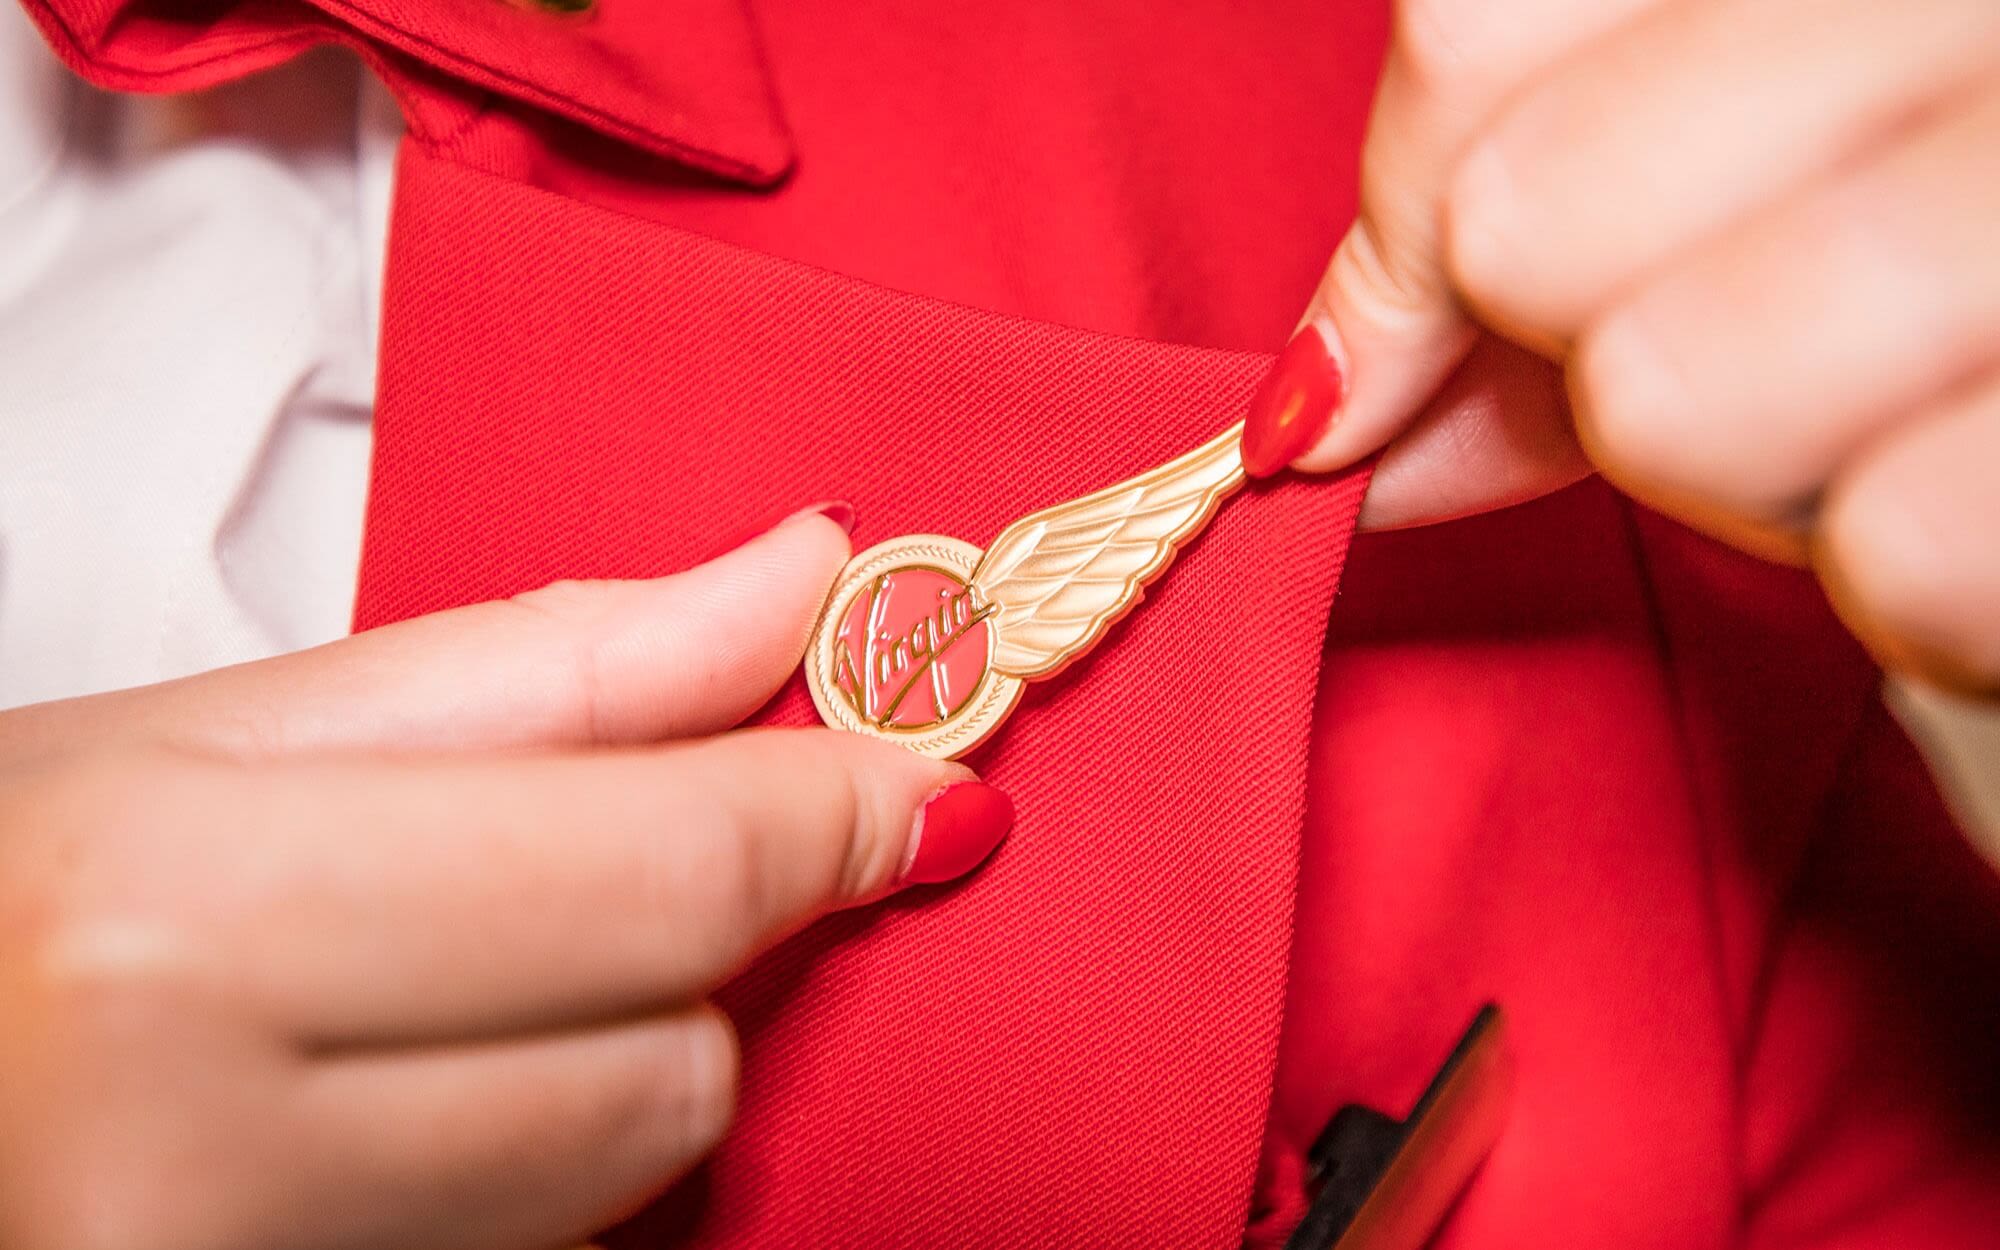 Close up of a cabin crew member in uniform and with red nail polish, adjusting their wings on their uniform